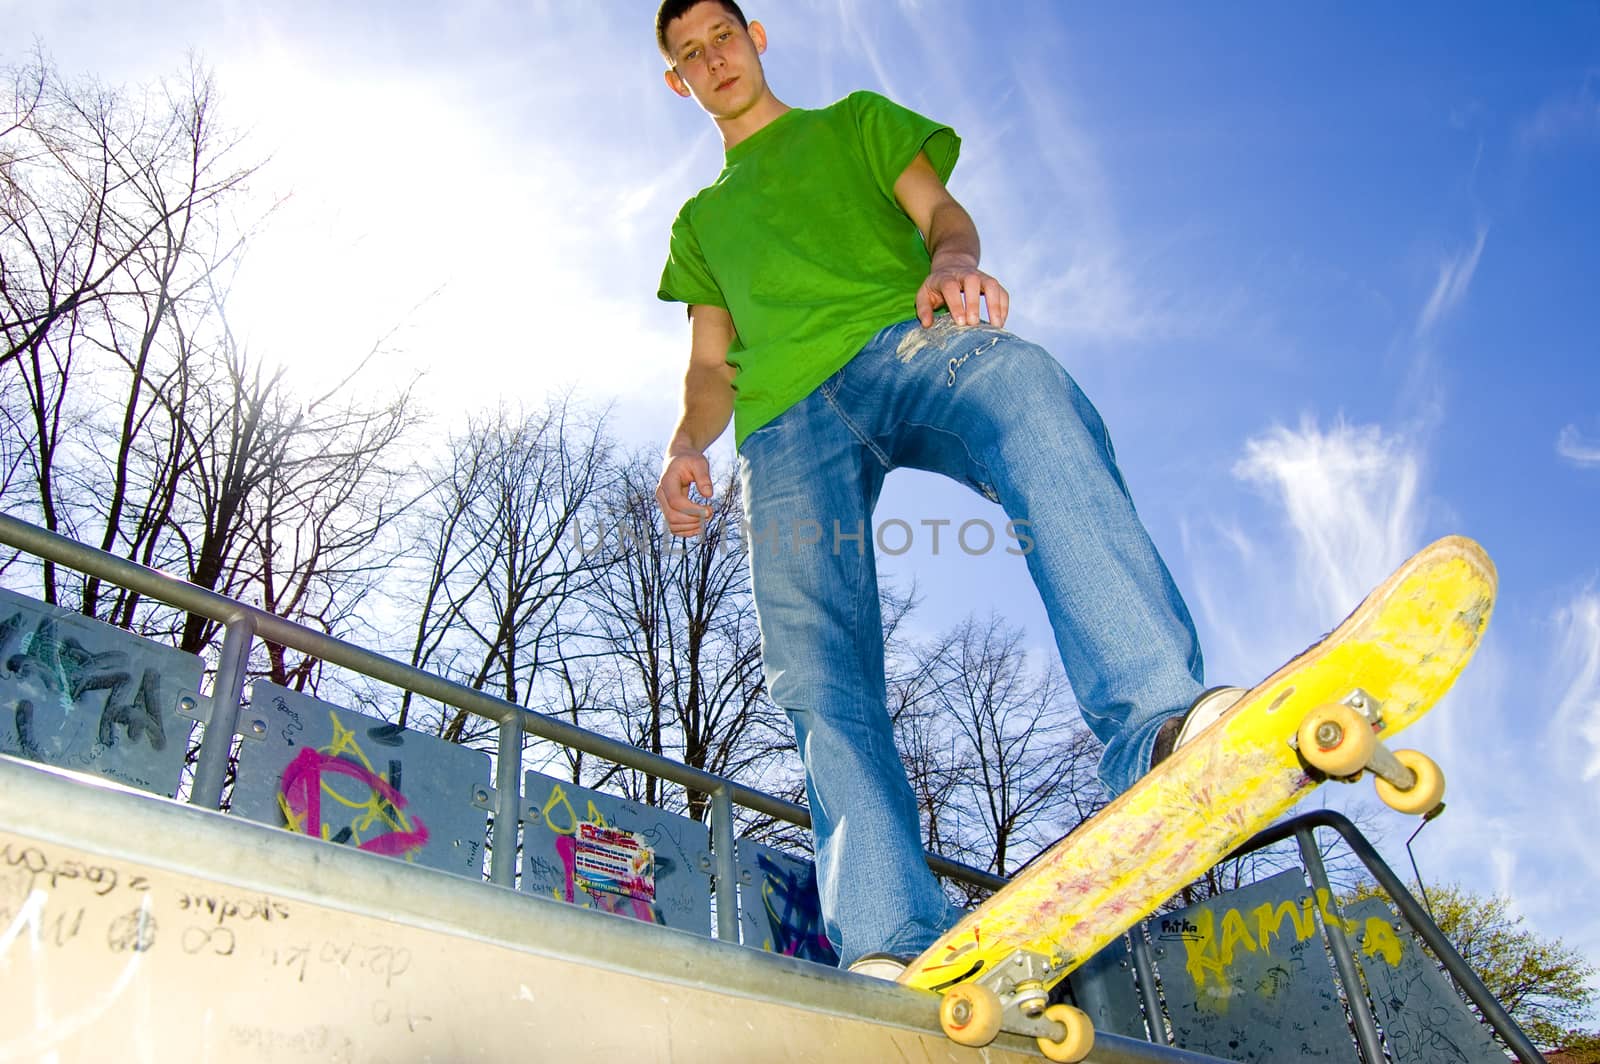 Sport conceptual image.  Teenage skateboarder standing on the ramp with skateboard.